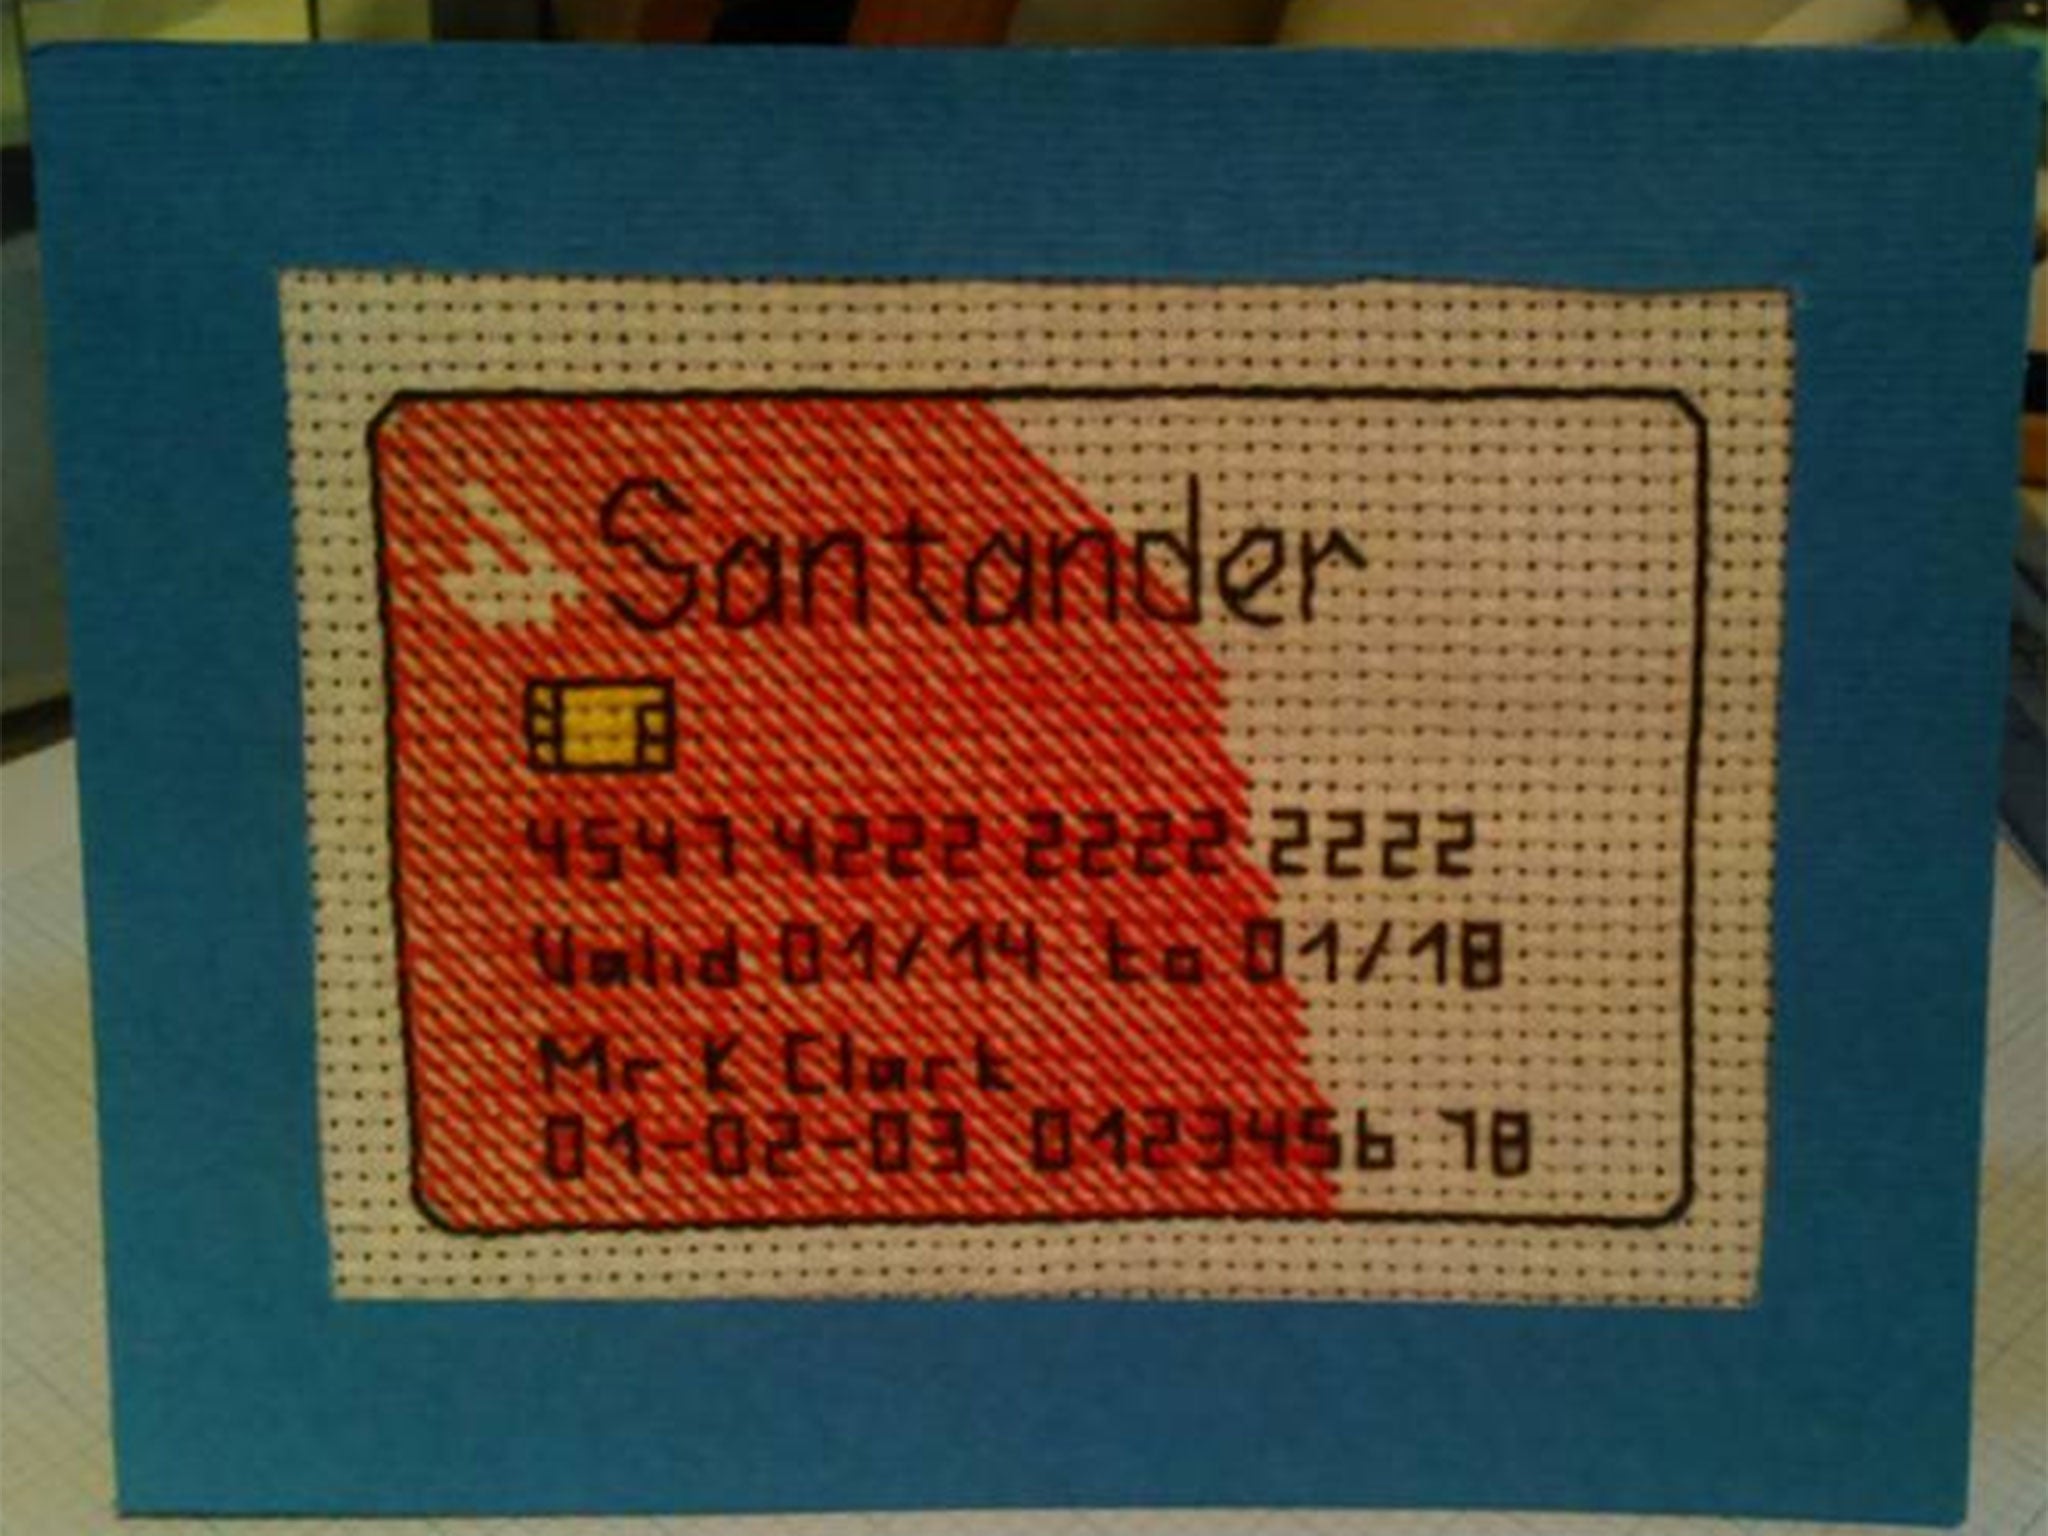 Londoner Keith Clark cross-stitched his own Santander bank card after the bank took too long to send him a real one